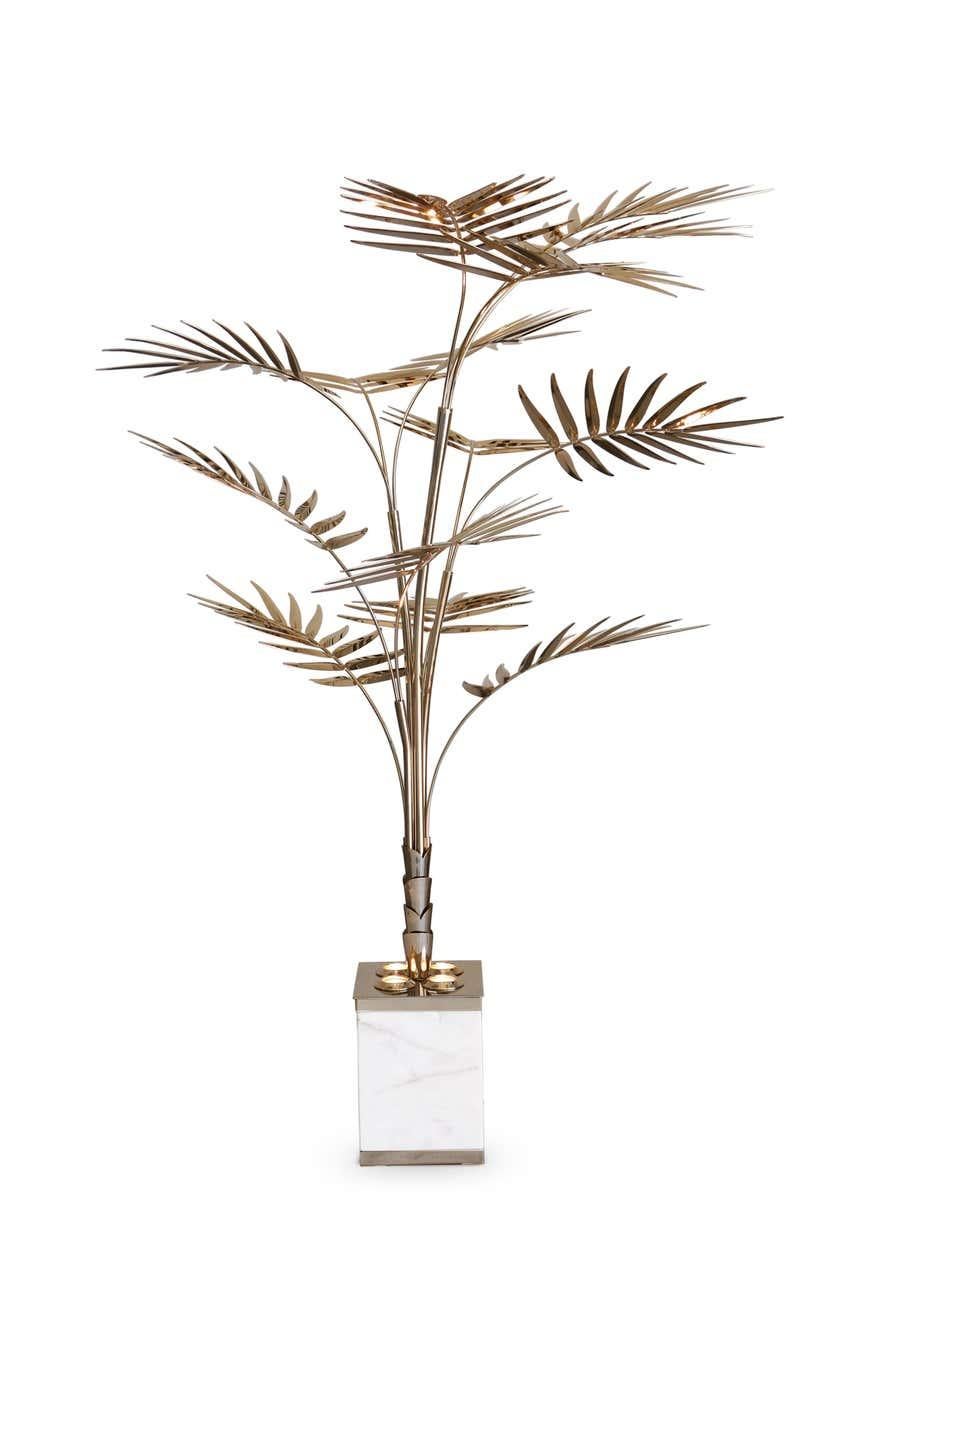 Palm tree floor lamp in brass with marble base

Estimated production time: 8-9 weeks

Materials: gold plated brass and estremoz marble

Dimensions:
Height 64.57 in. (164 cm)
Diameter 42.92 in. (109 cm)

Metal finishes available:
Polished